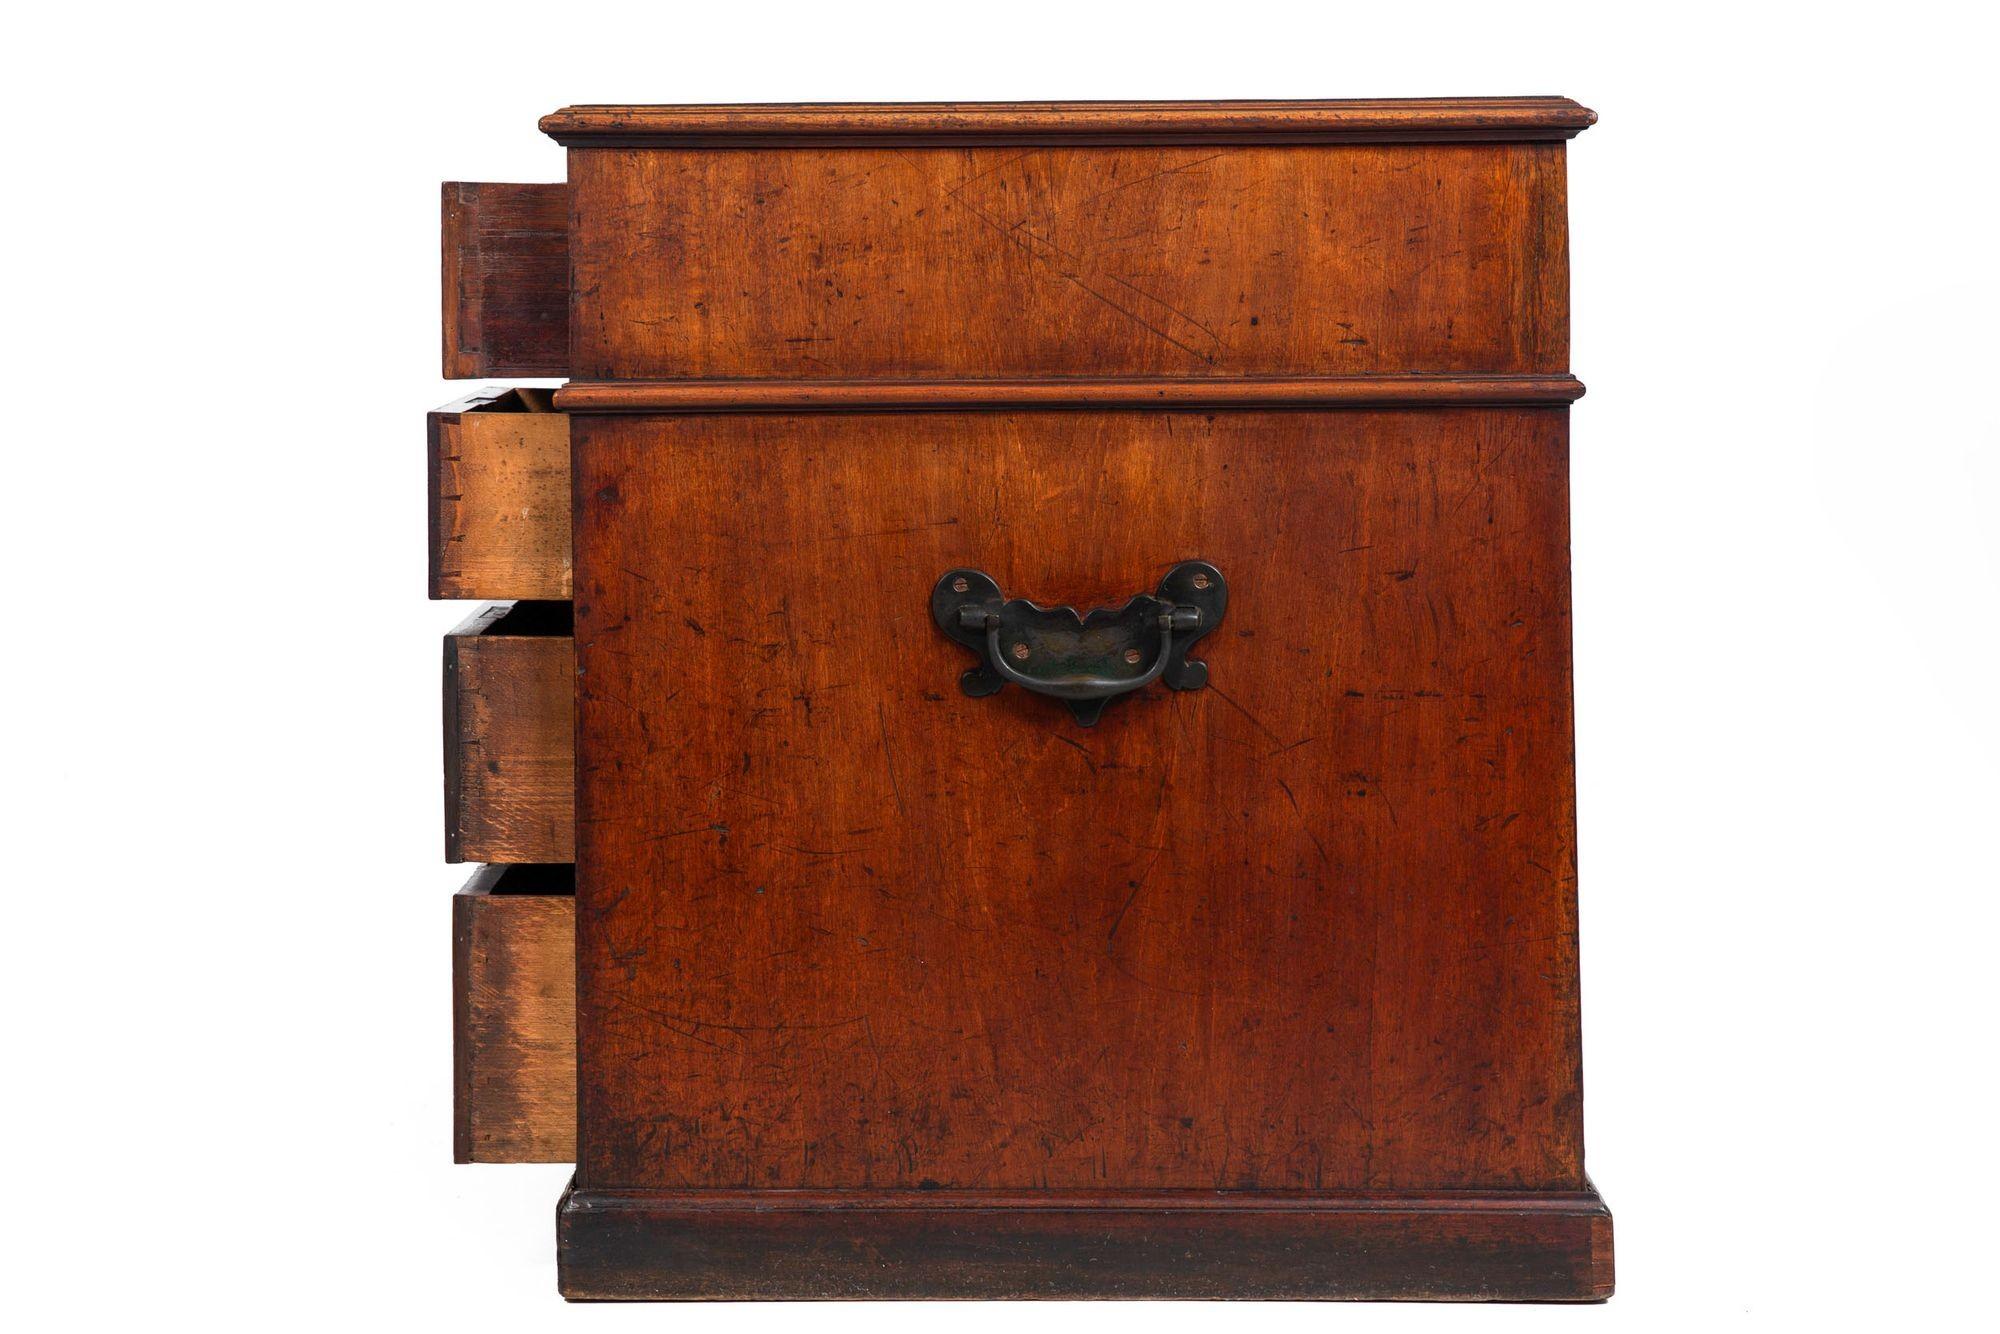 English George III Mahogany & Leather Pedestal “Rent” Writing Desk ca. 1800 For Sale 1